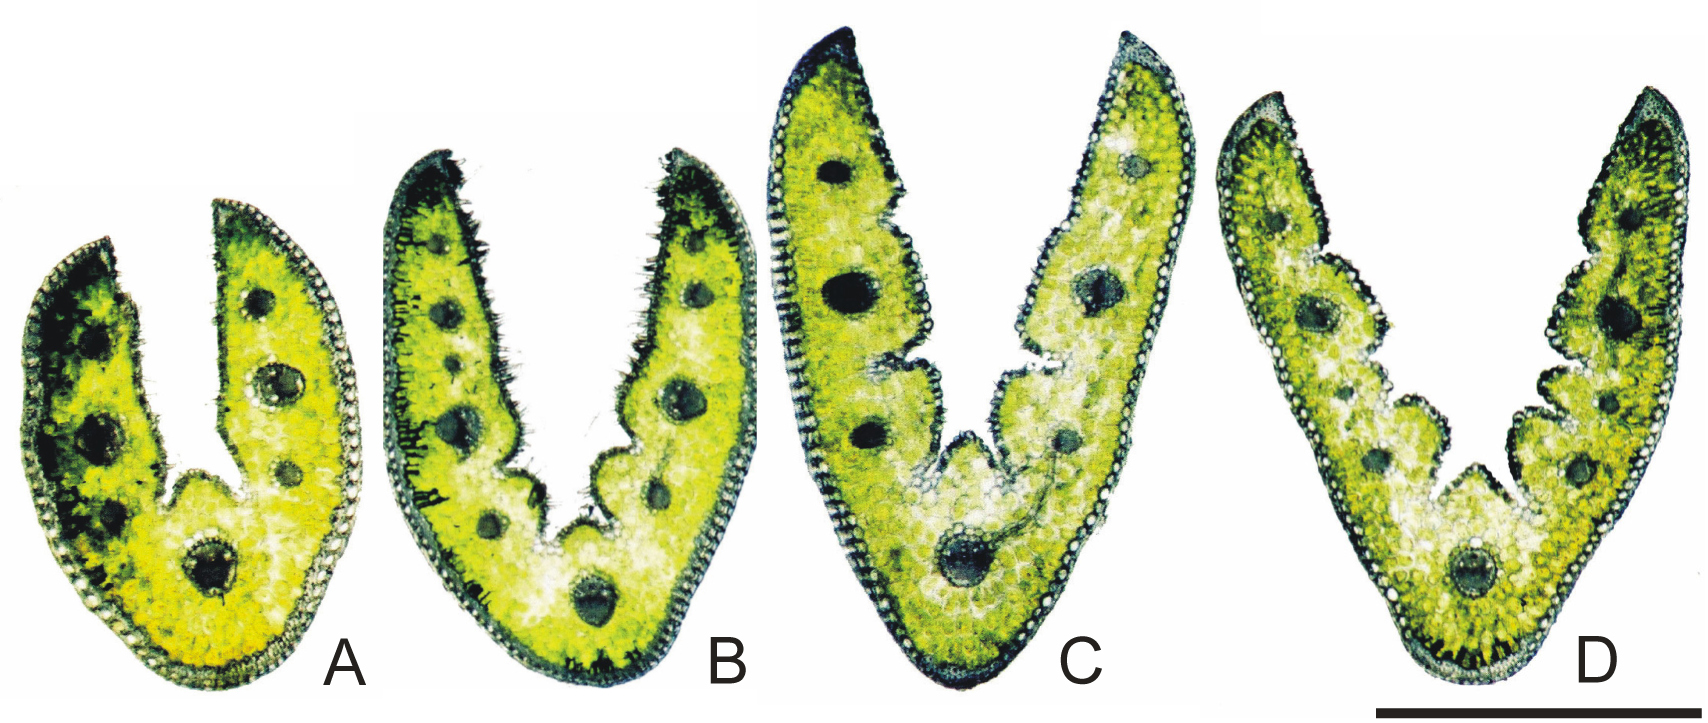 Fig. 1. Cross-sections of Festuca trachyphylla from different habitats:A-B xerothermic grasslands, C-D sand dunes. Scale bar=1 mm.